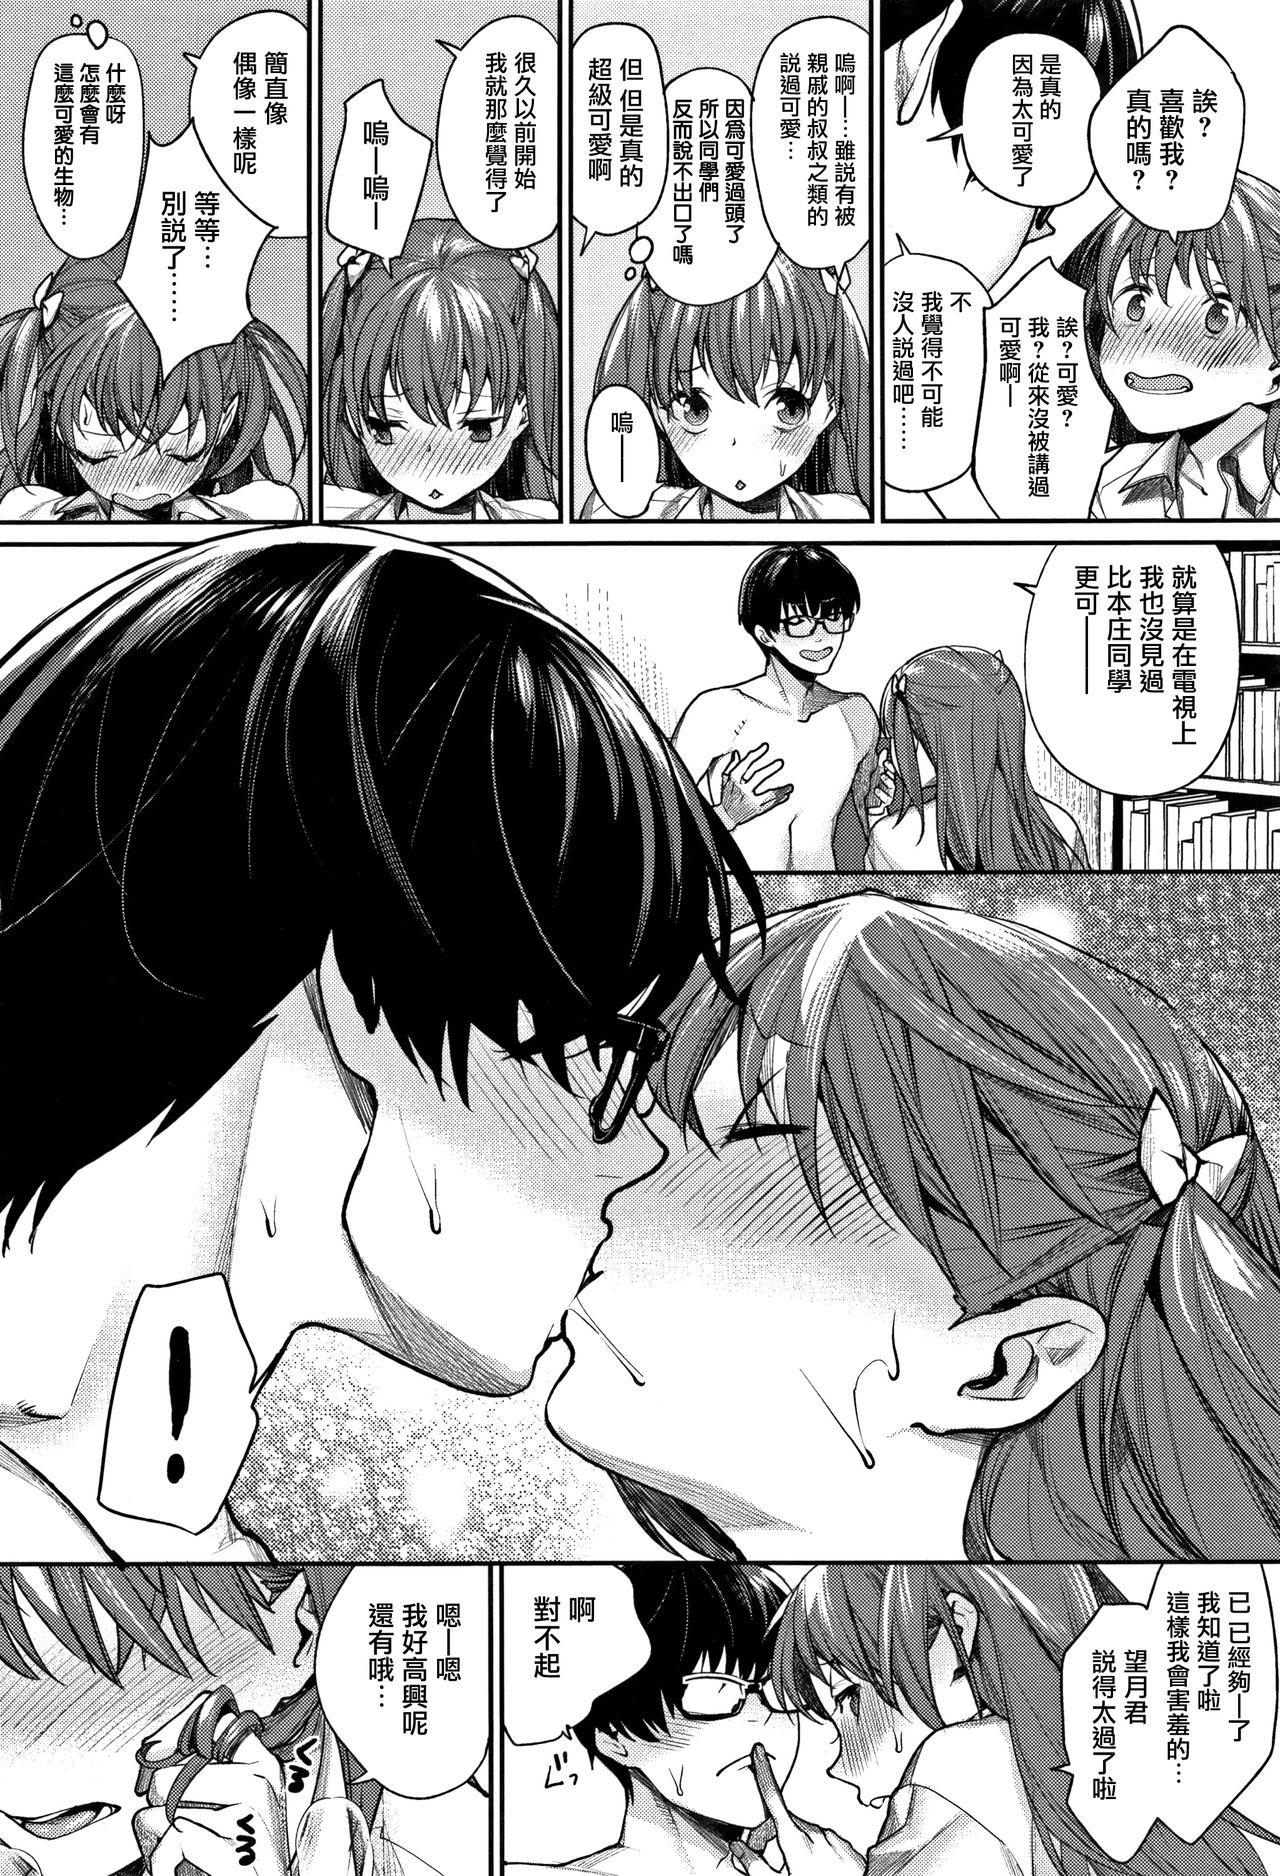 Twerking [MGMEE] Bokura no Etude - Our H Chu Do Ch.1-4 [Chinese] [無邪気漢化組] Cocksuckers - Page 12